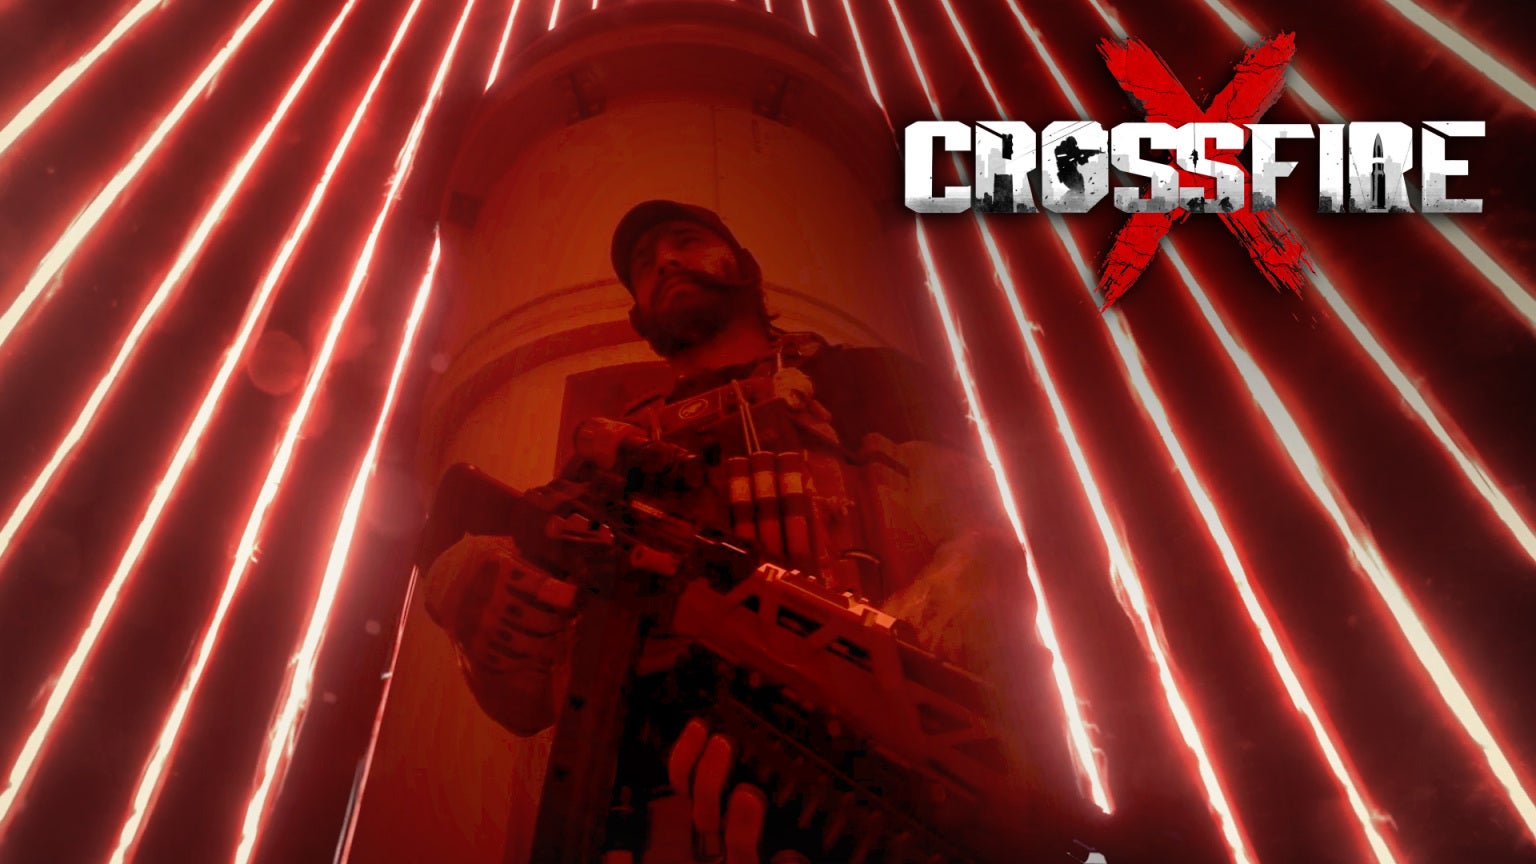 Image for Crossfire X: check out Remedy's single-player campaign for this Xbox shooter